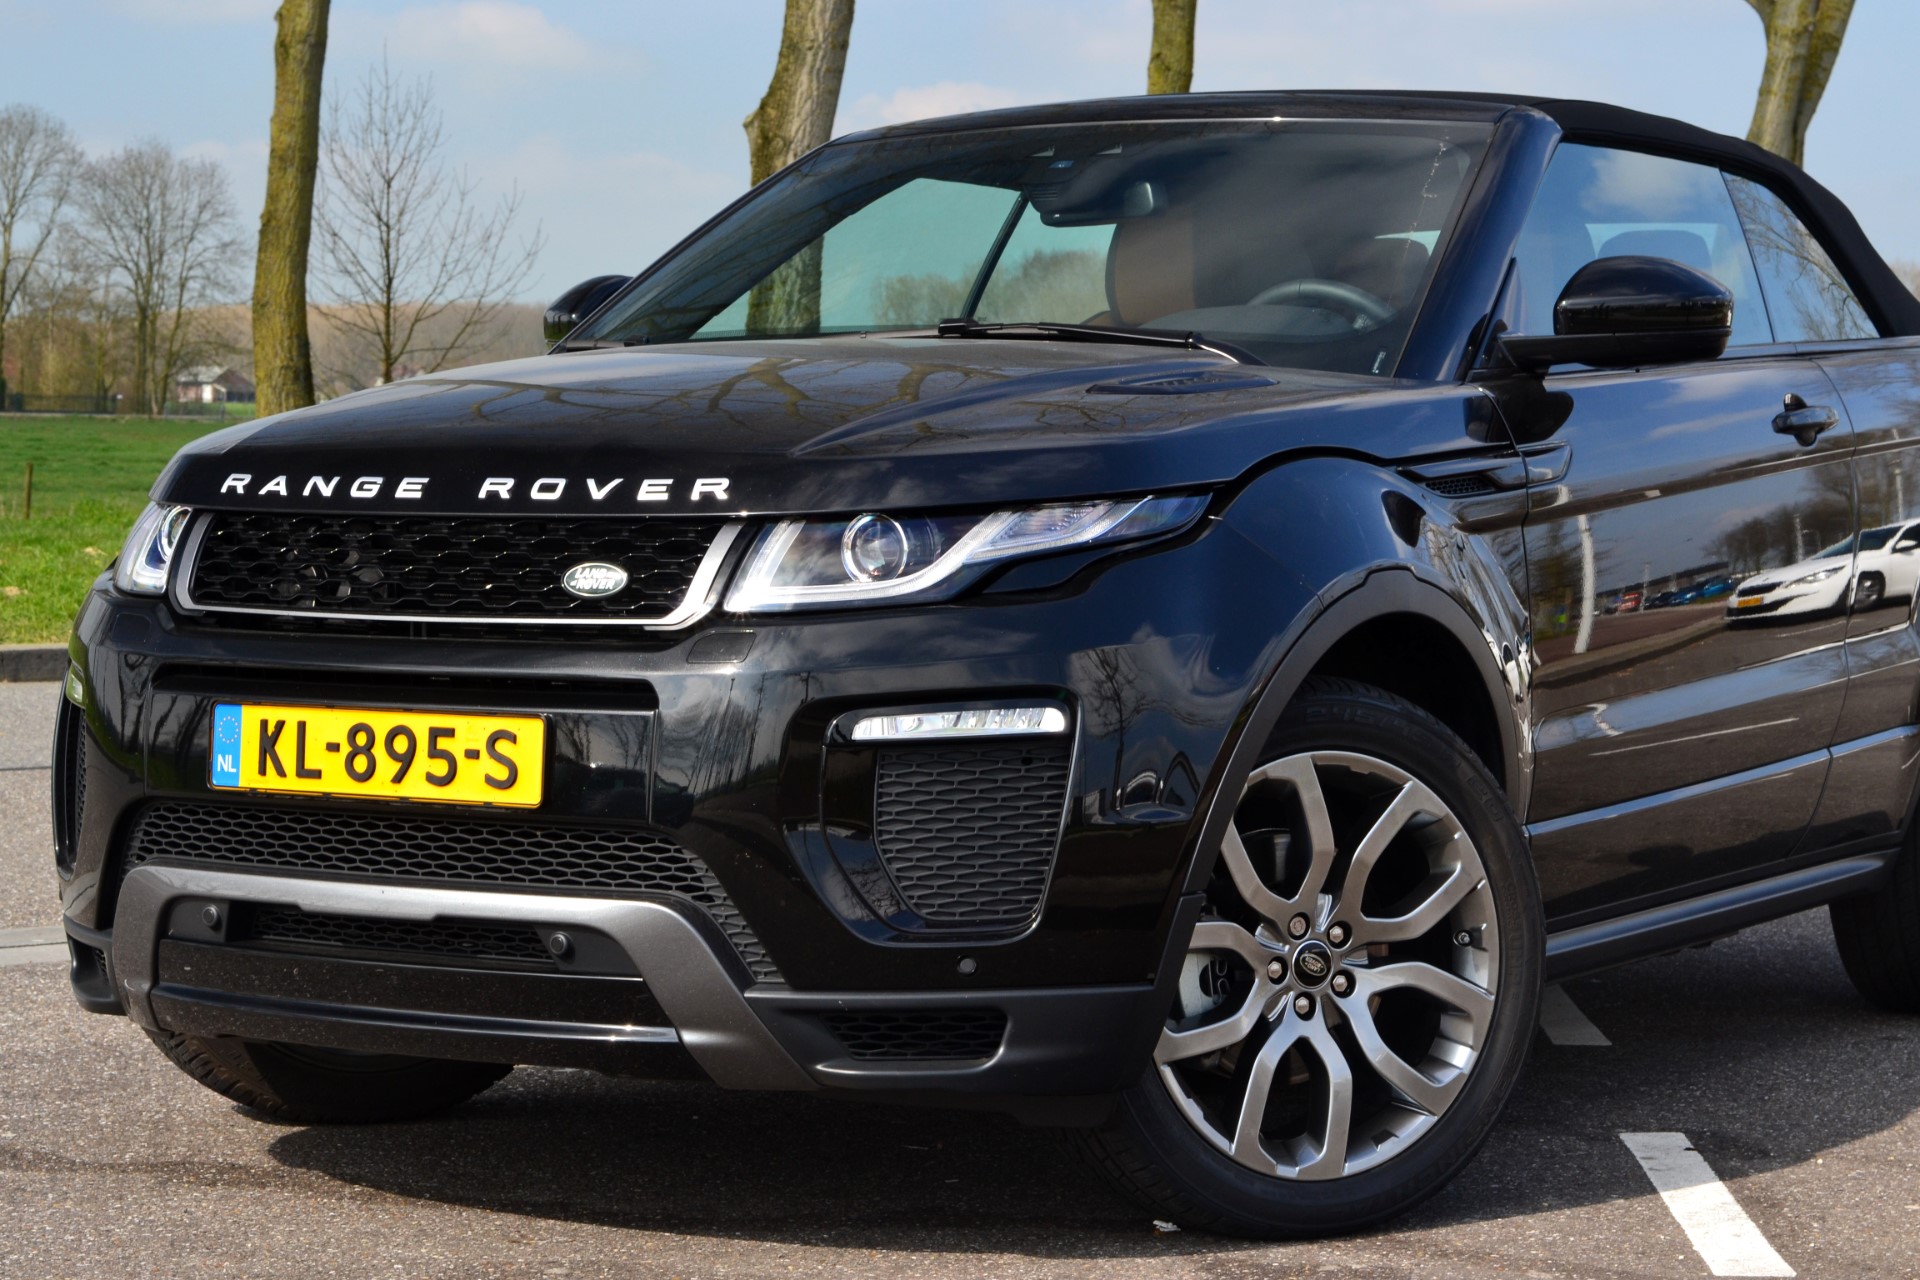 Lao Categorie gebed Test Land Rover Range Rover Convertible 2017 - Autoverhaal.nl